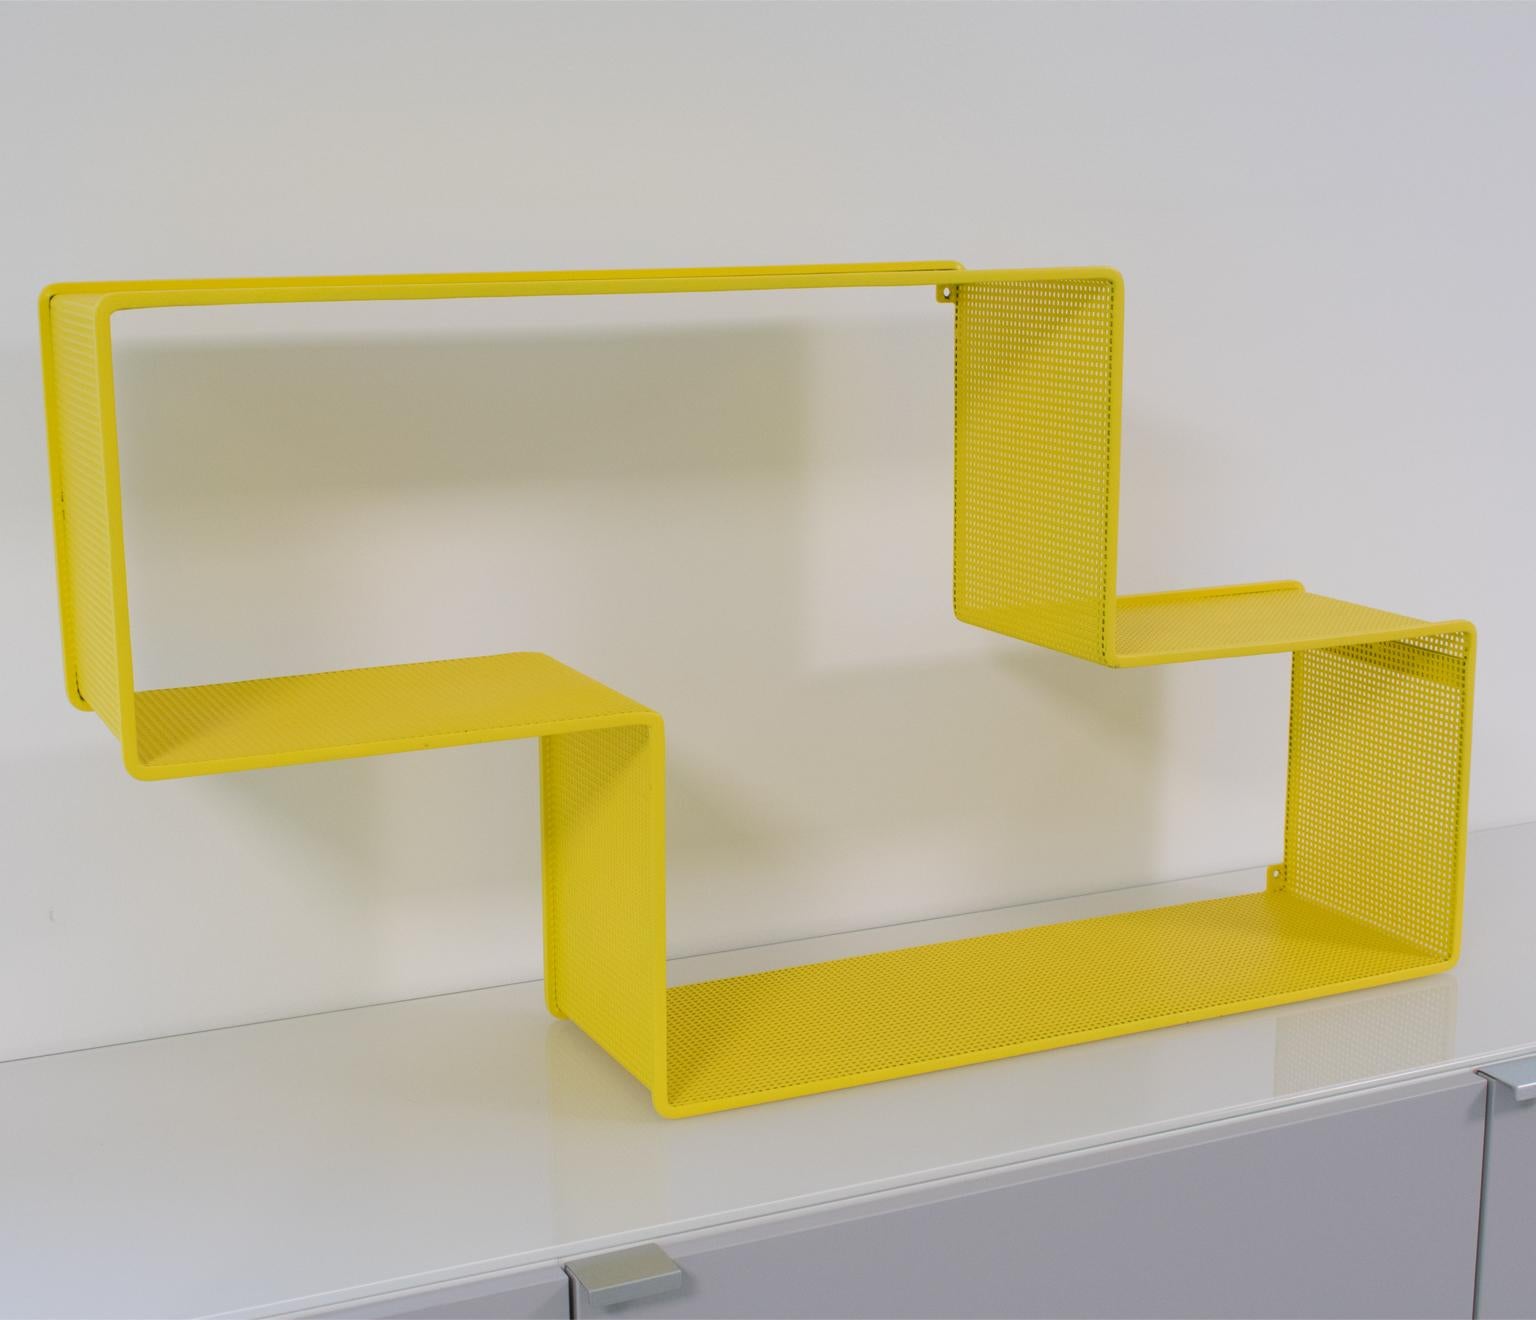 Very nice large modular wall mounted shelf designed in the 1950s by French Mathieu Mategot (1910-2001) and known as the 